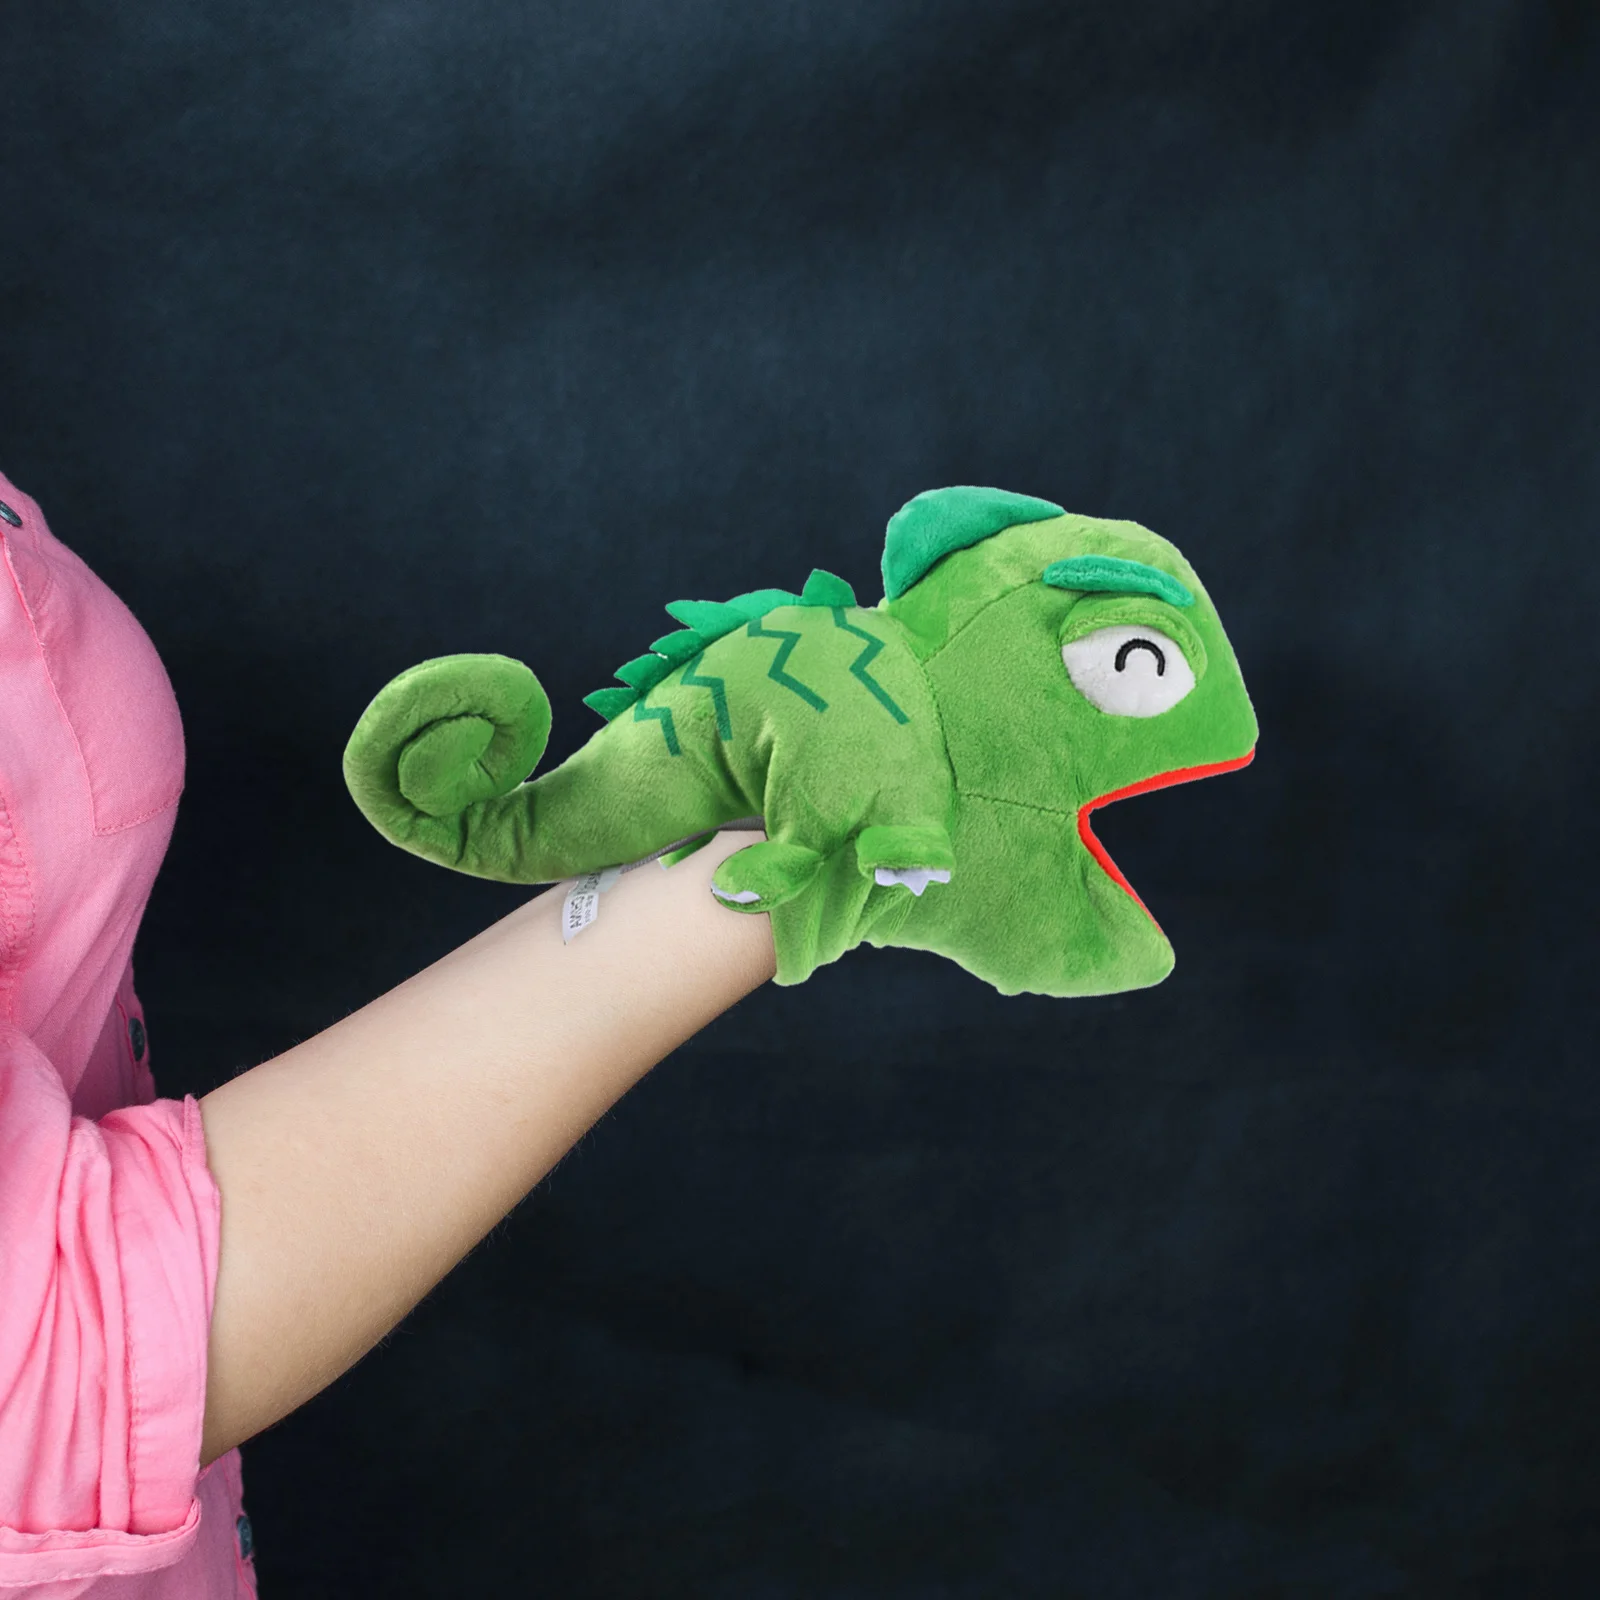 Funny Lizard Hand Puppet Plush Reptile Animal Hand Puppet Toy Toddler Kids Gift animal plush hand puppet rattle toy kids cute soft toy story dolls gift children playing rustling sound educational fluff toys